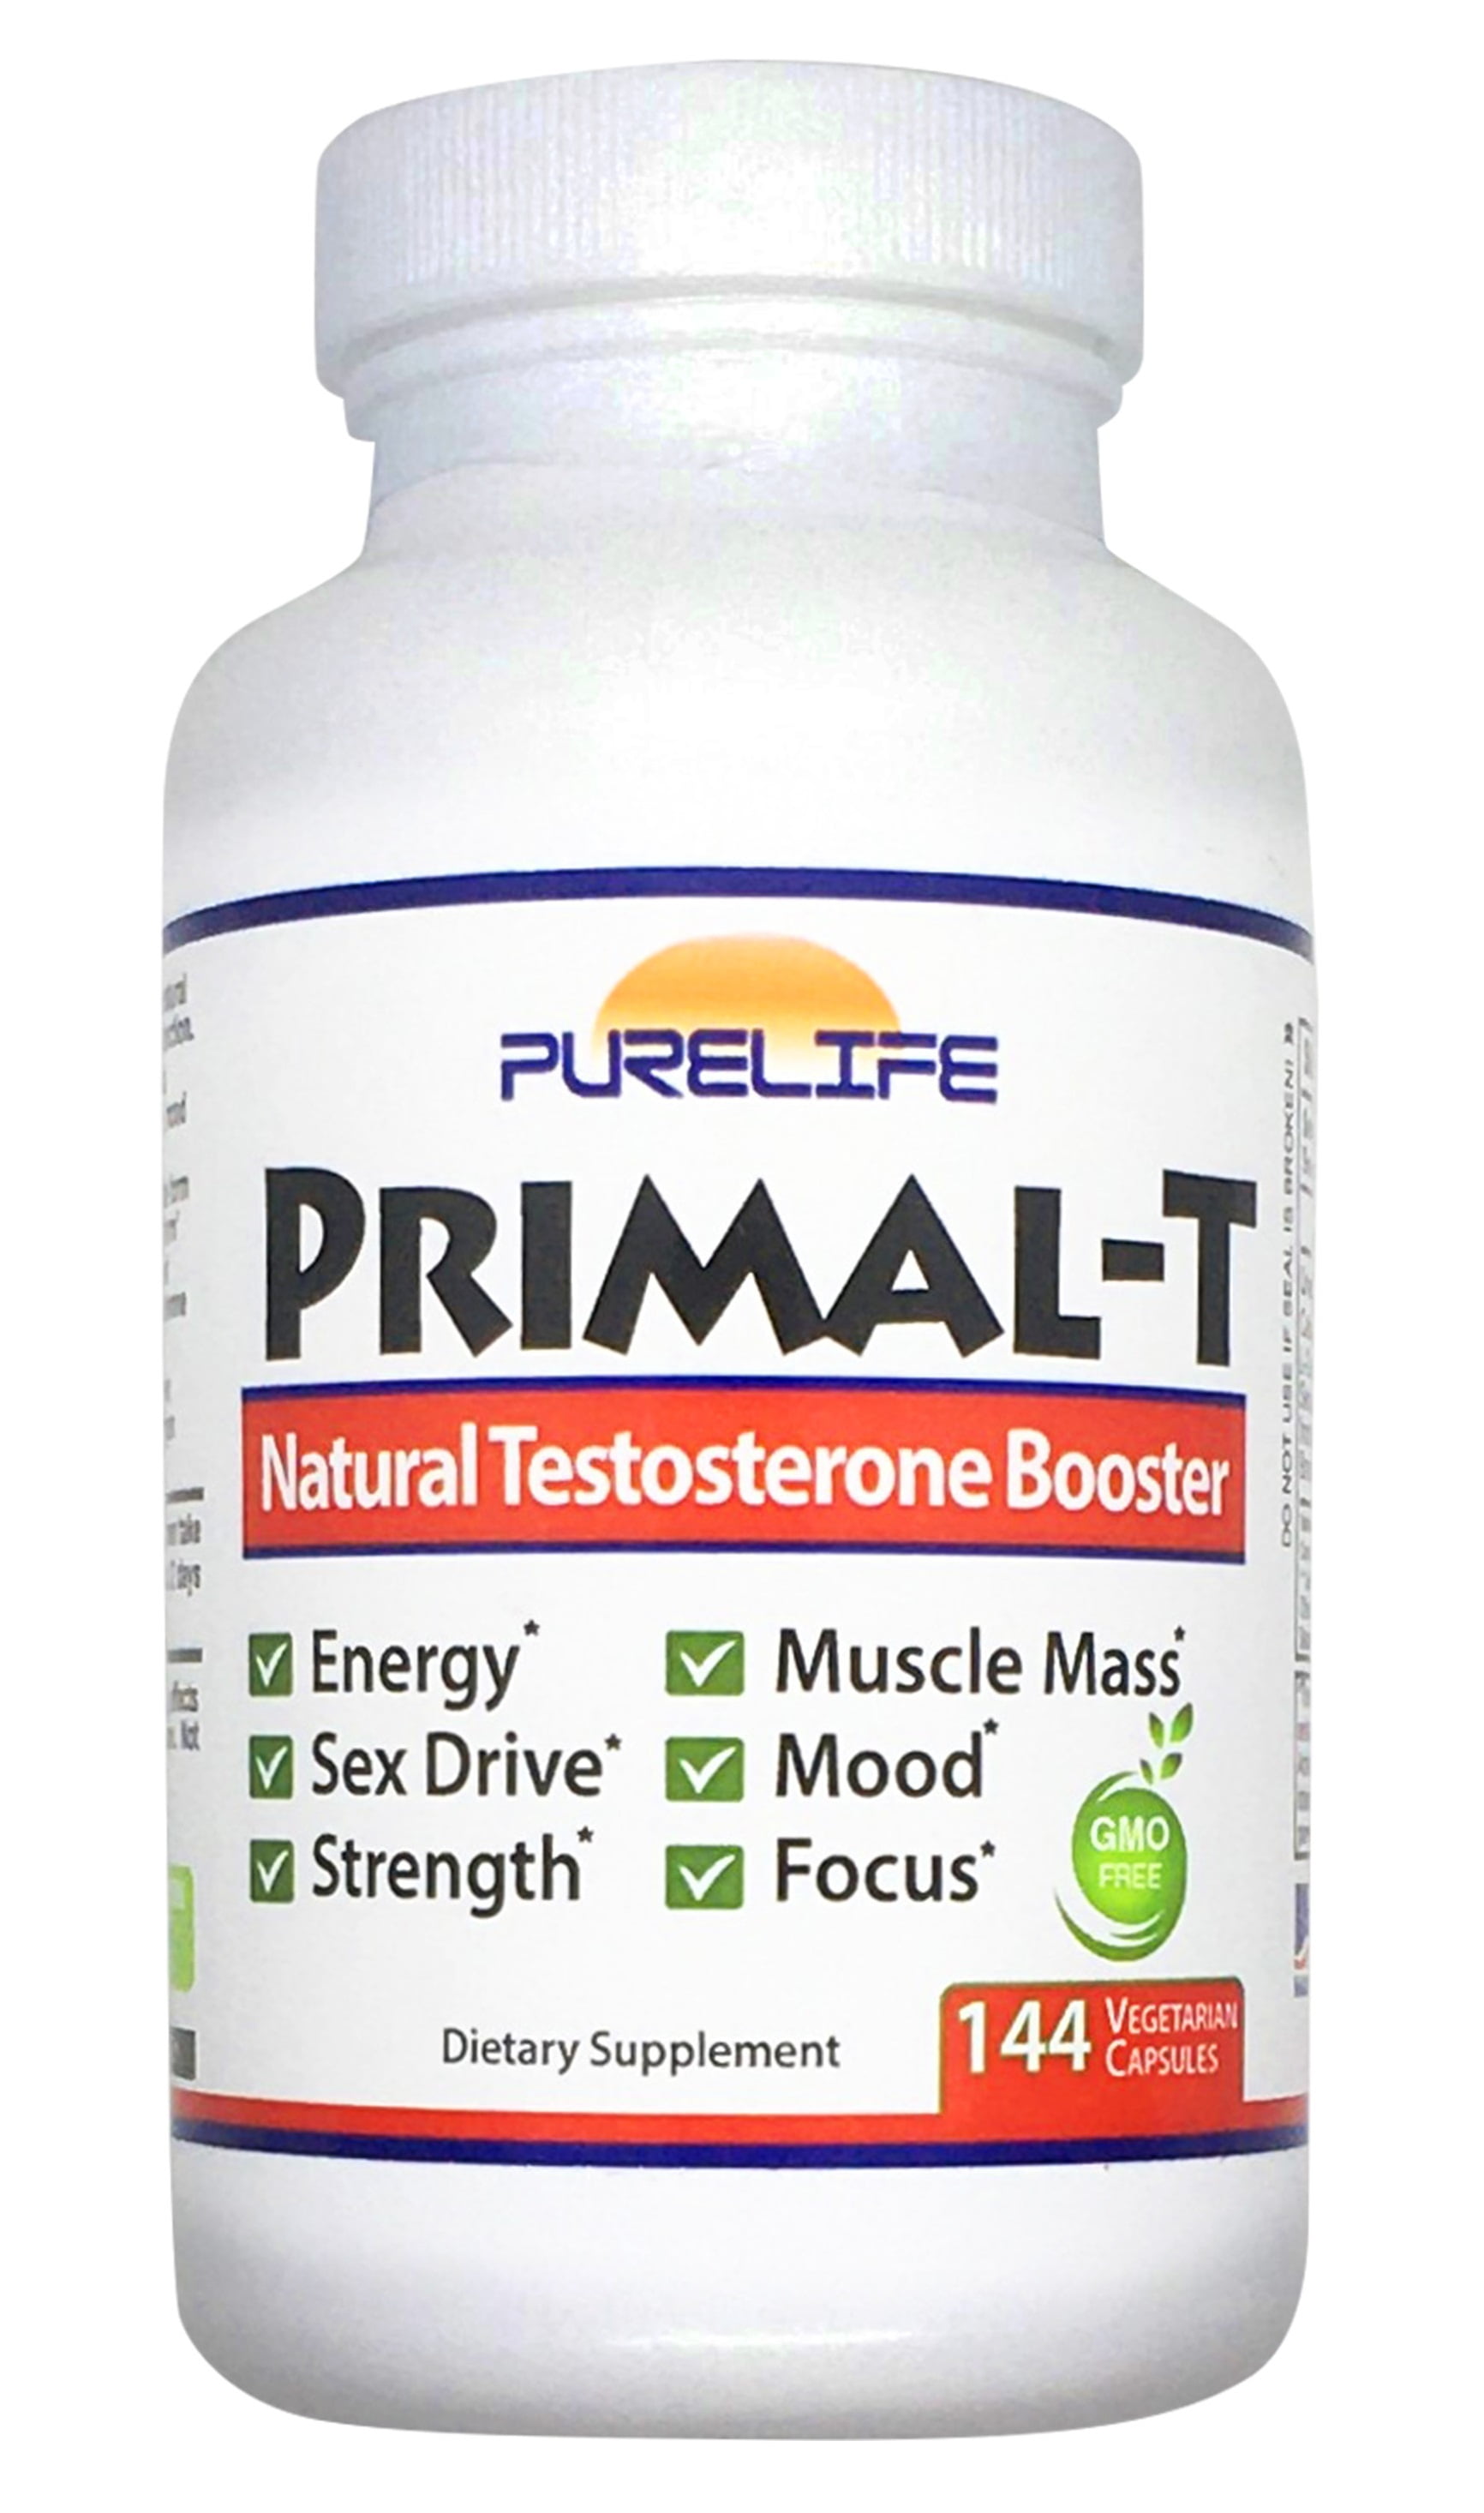 Purelife Primal-T – Natural Booster for Men - Male Enhancing Supplement to Boost Low Testosterone Levels. Build Muscle Mass, Lose Fat, Increase Energy, Strength, Stamina (144 Capsules) - Walmart.com